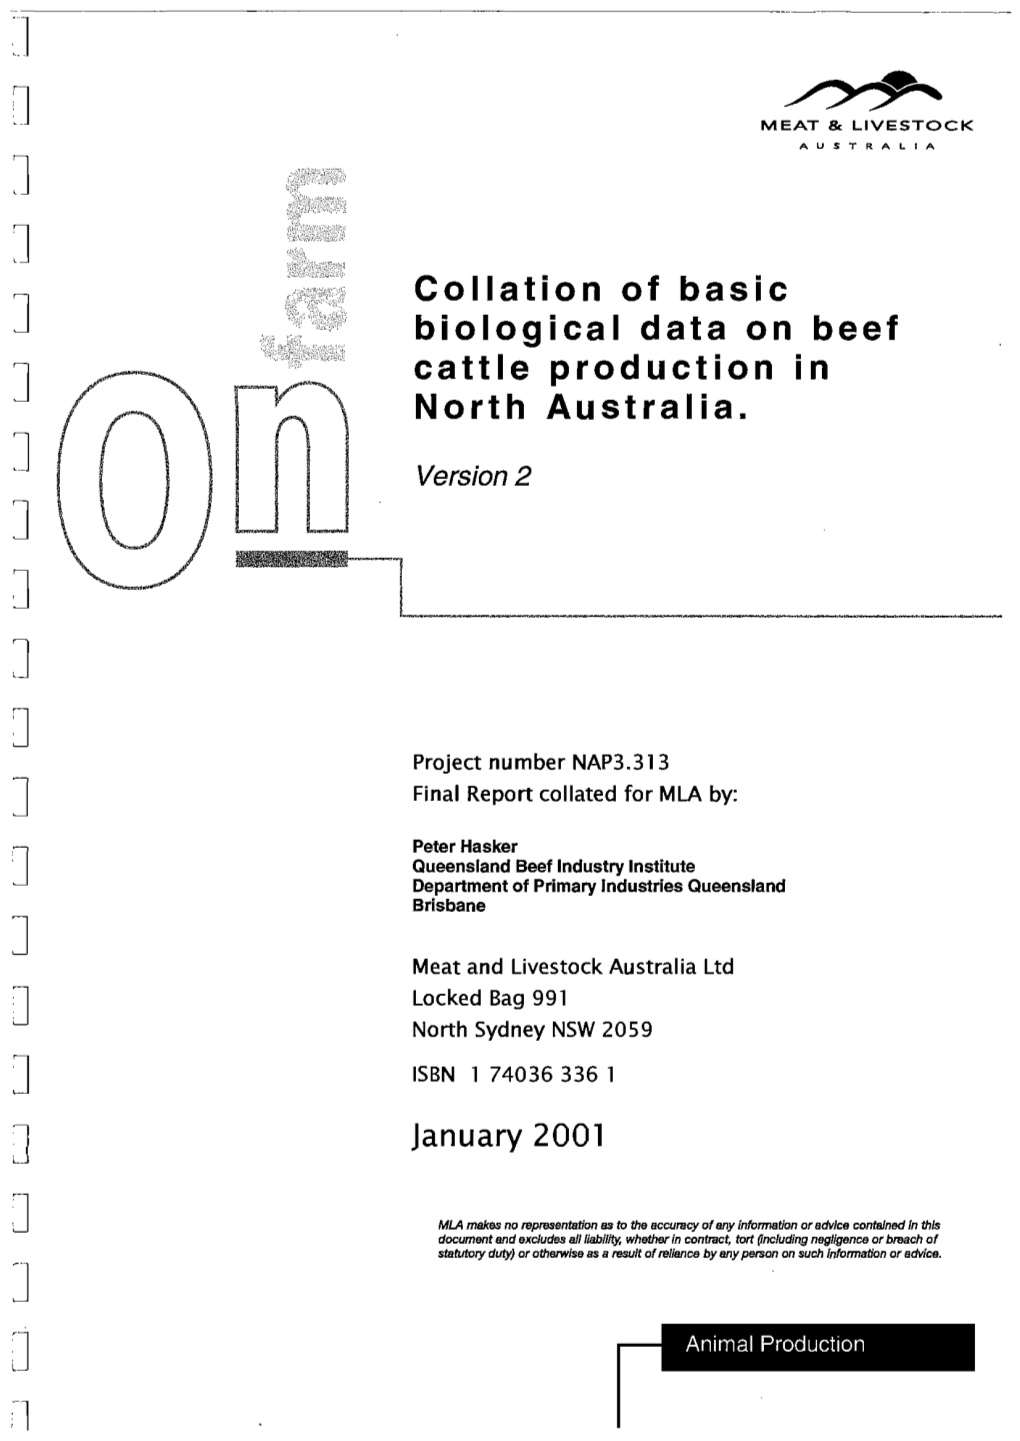 Collation of Basic Biological Data on Beef Cattle Production in North Australia